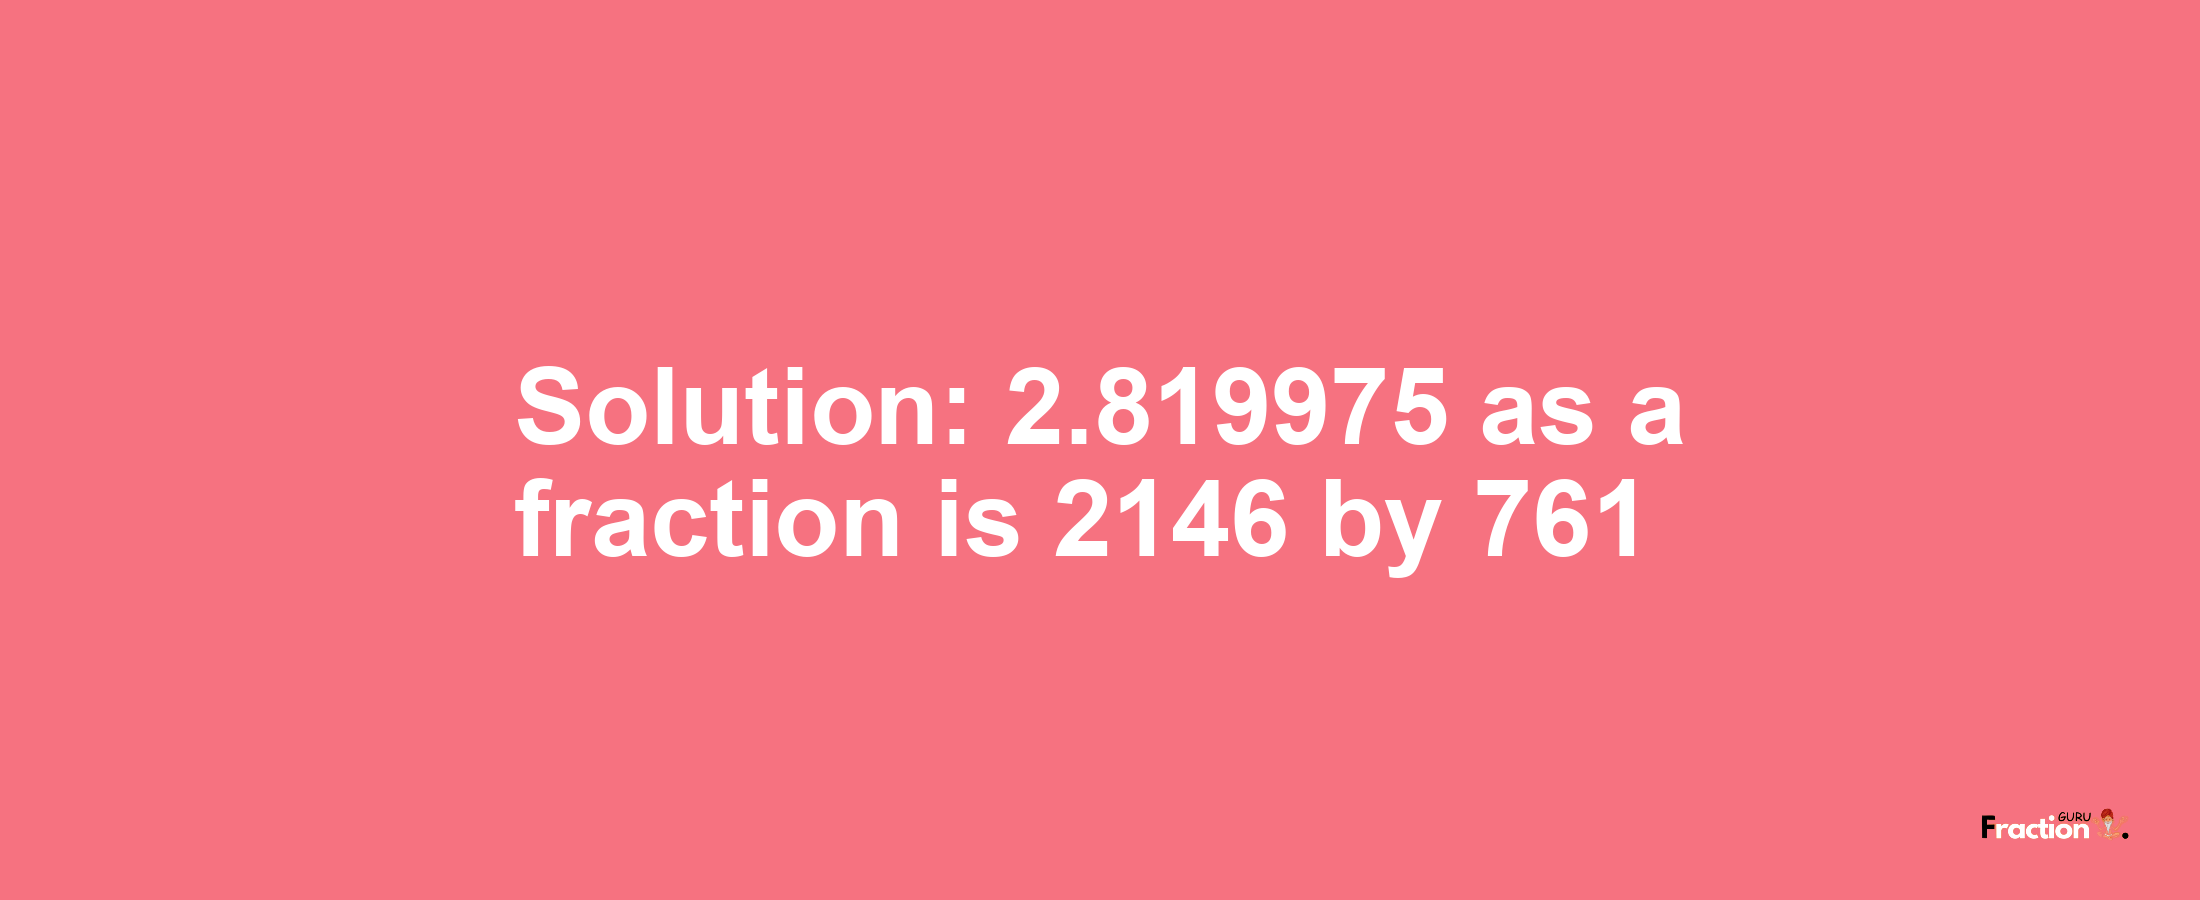 Solution:2.819975 as a fraction is 2146/761